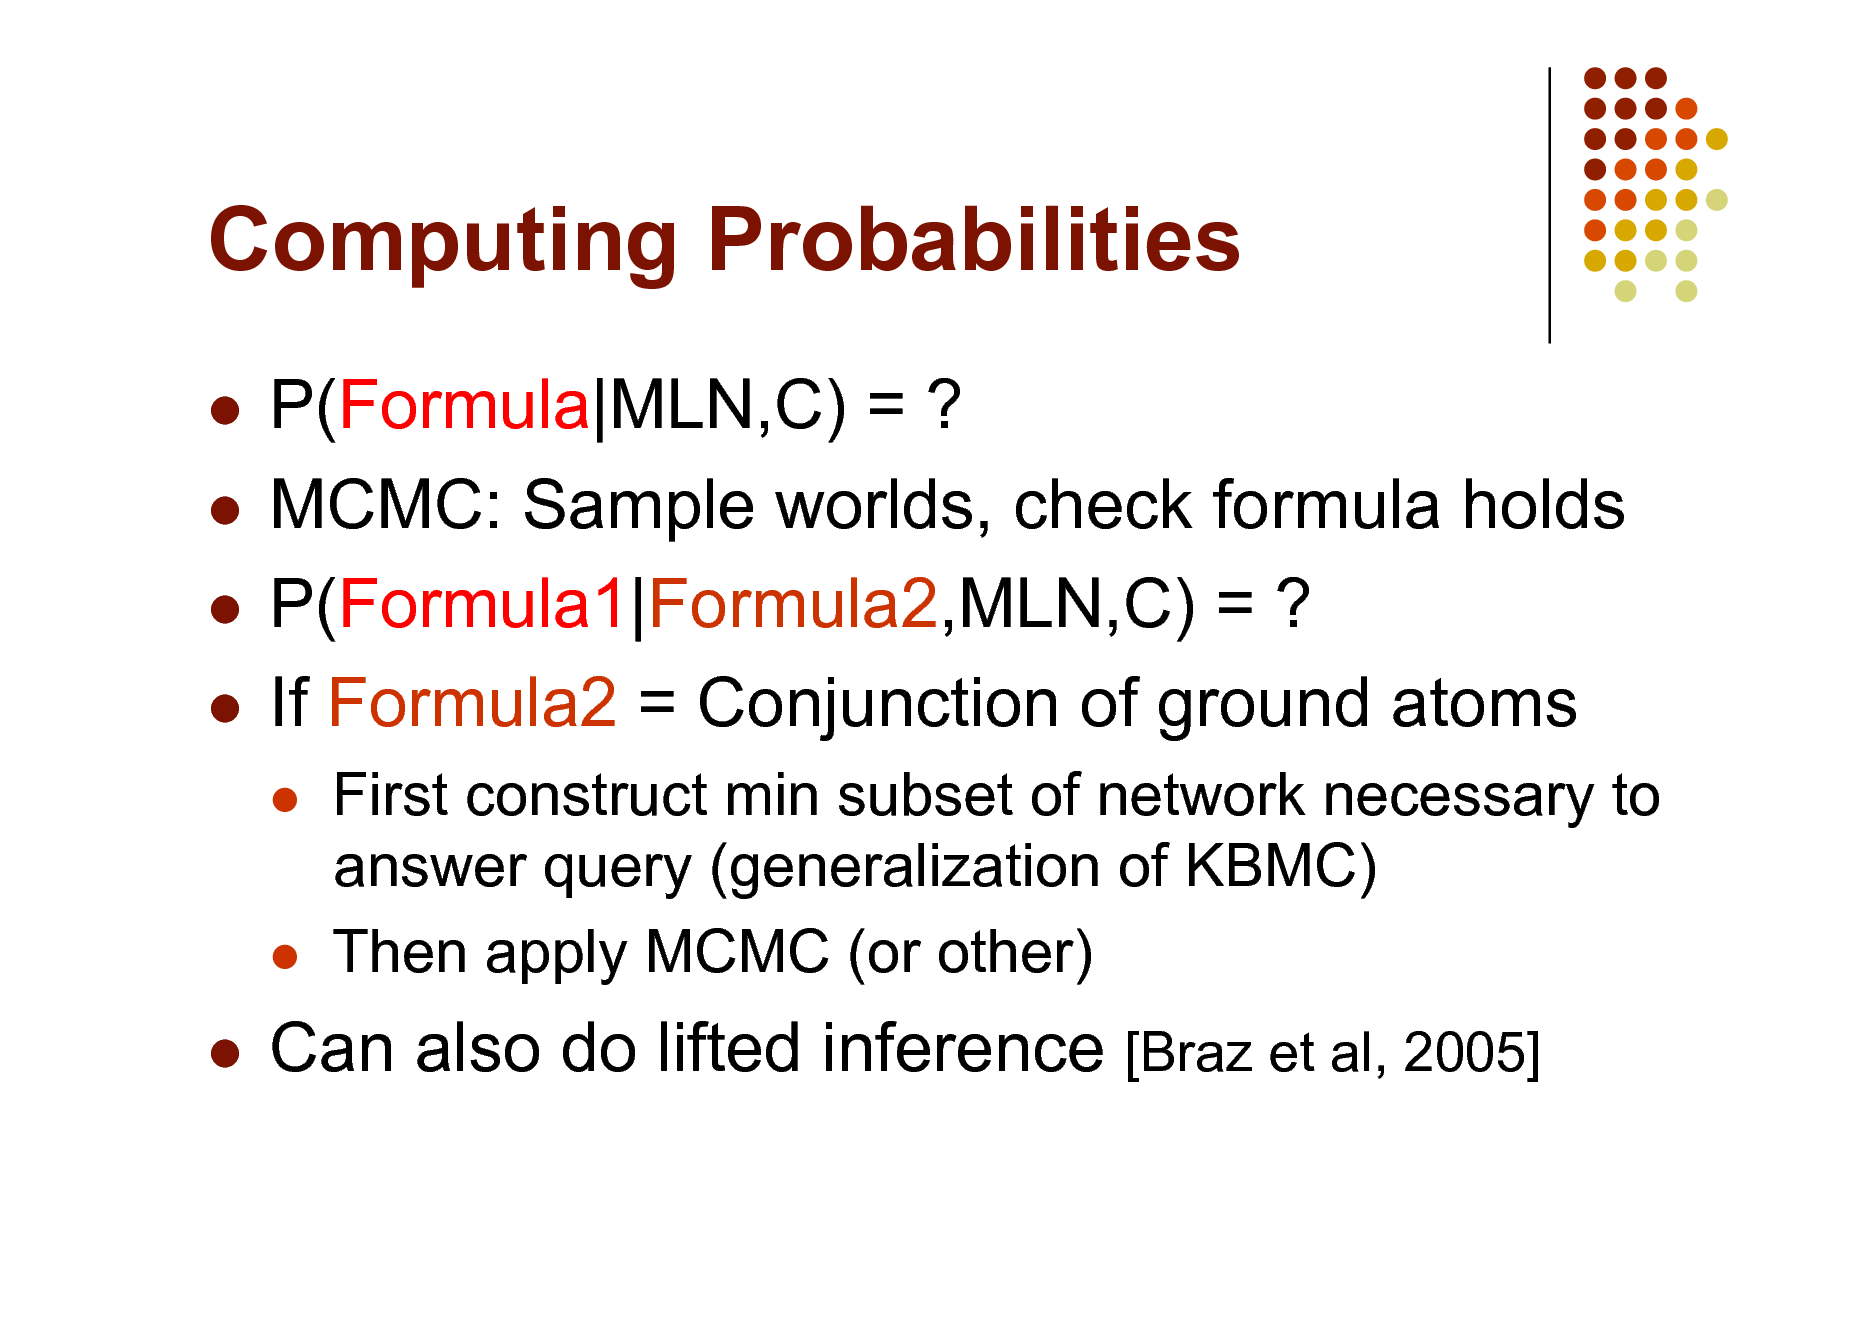 Slide: Computing Probabilities
P(Formula|MLN,C) = ?  MCMC: Sample worlds, check formula holds  P(Formula1|Formula2,MLN,C) = ?  If Formula2 = Conjunction of ground atoms





First construct min subset of network necessary to answer query (generalization of KBMC) Then apply MCMC (or other)



Can also do lifted inference [Braz et al, 2005]

